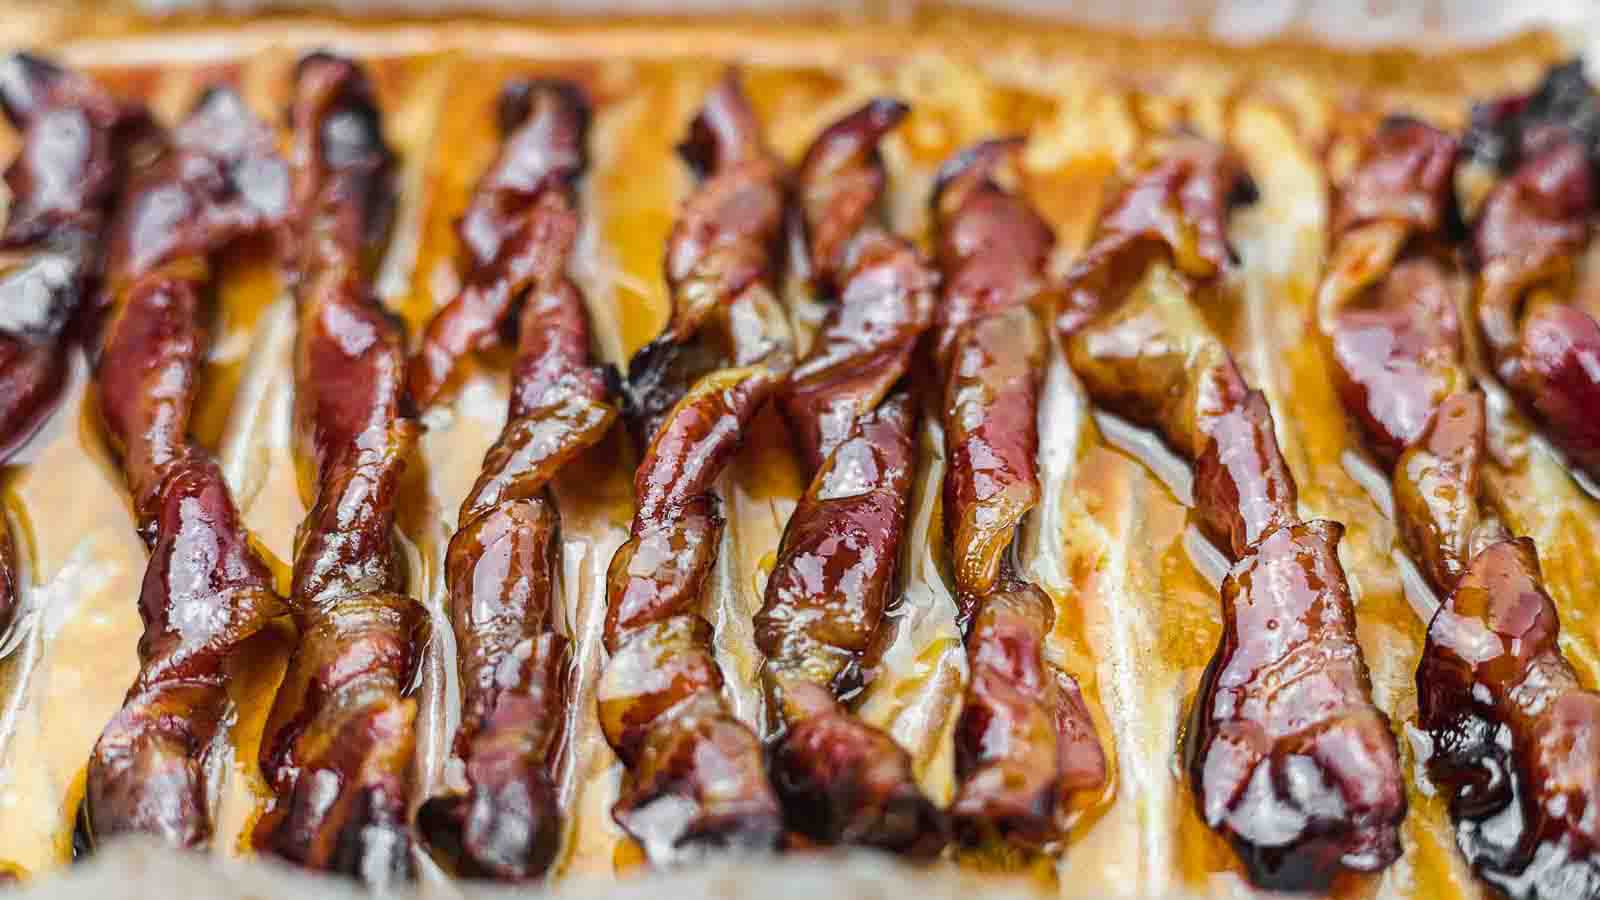 Candied Bacon Twists on a parchment paper.